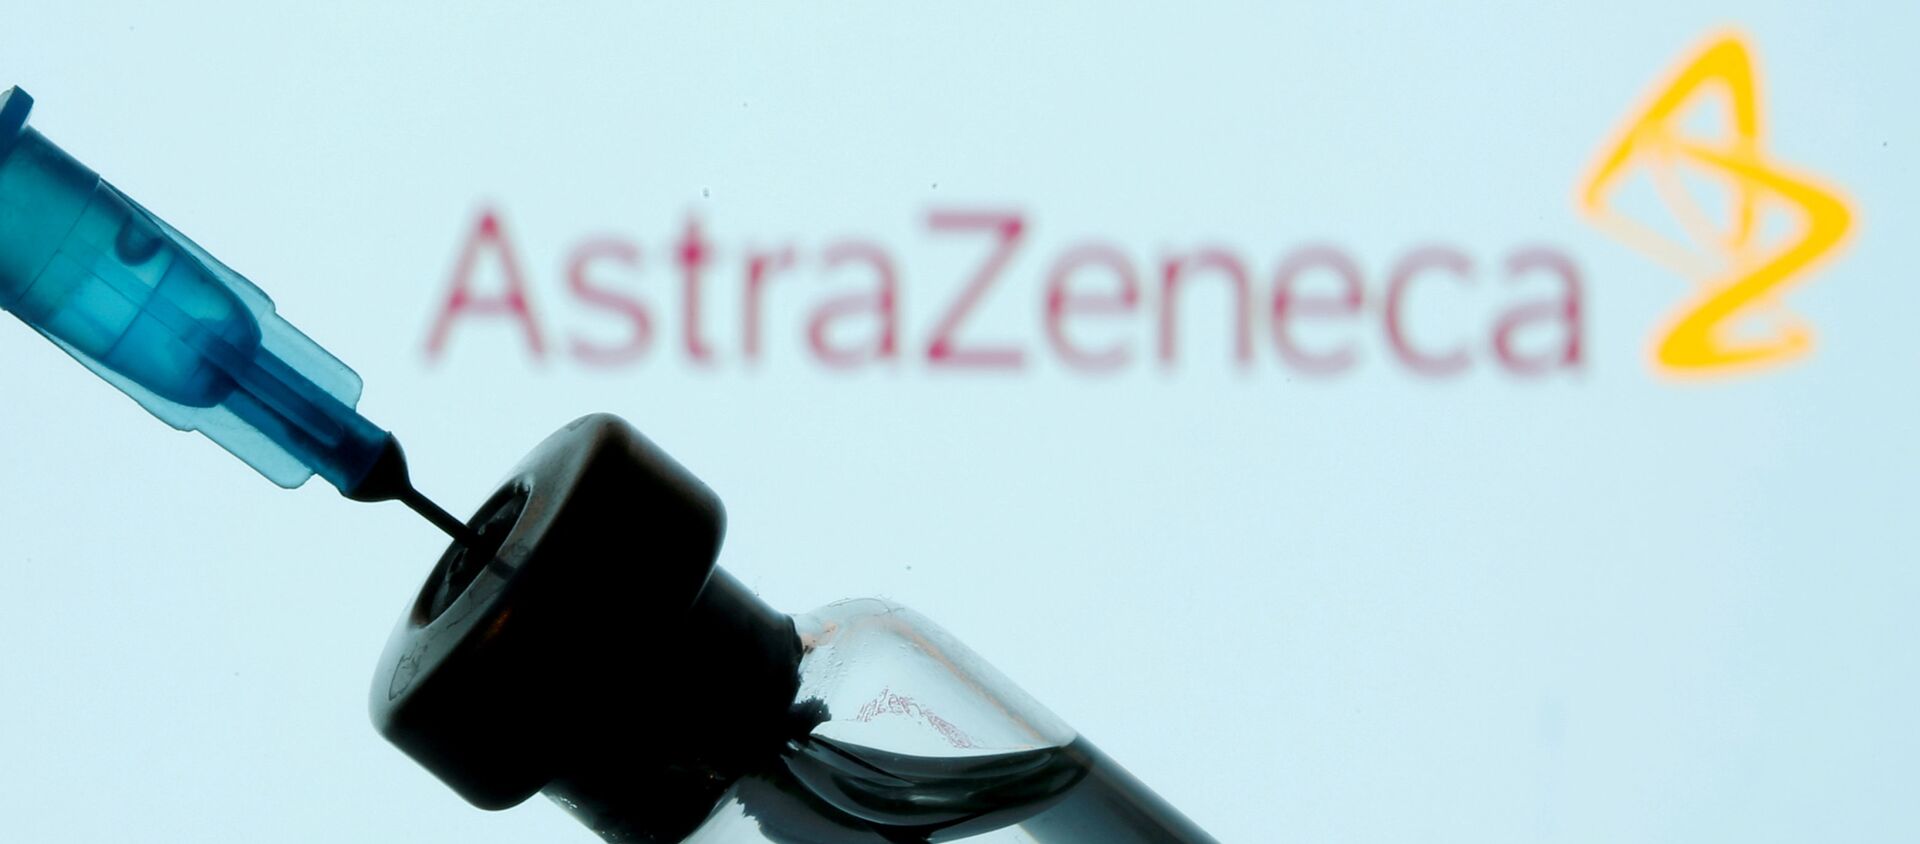 FILE PHOTO: A vial and syringe are seen in front of a displayed AstraZeneca logo in this illustration taken January 11, 2021 - Sputnik International, 1920, 01.02.2021